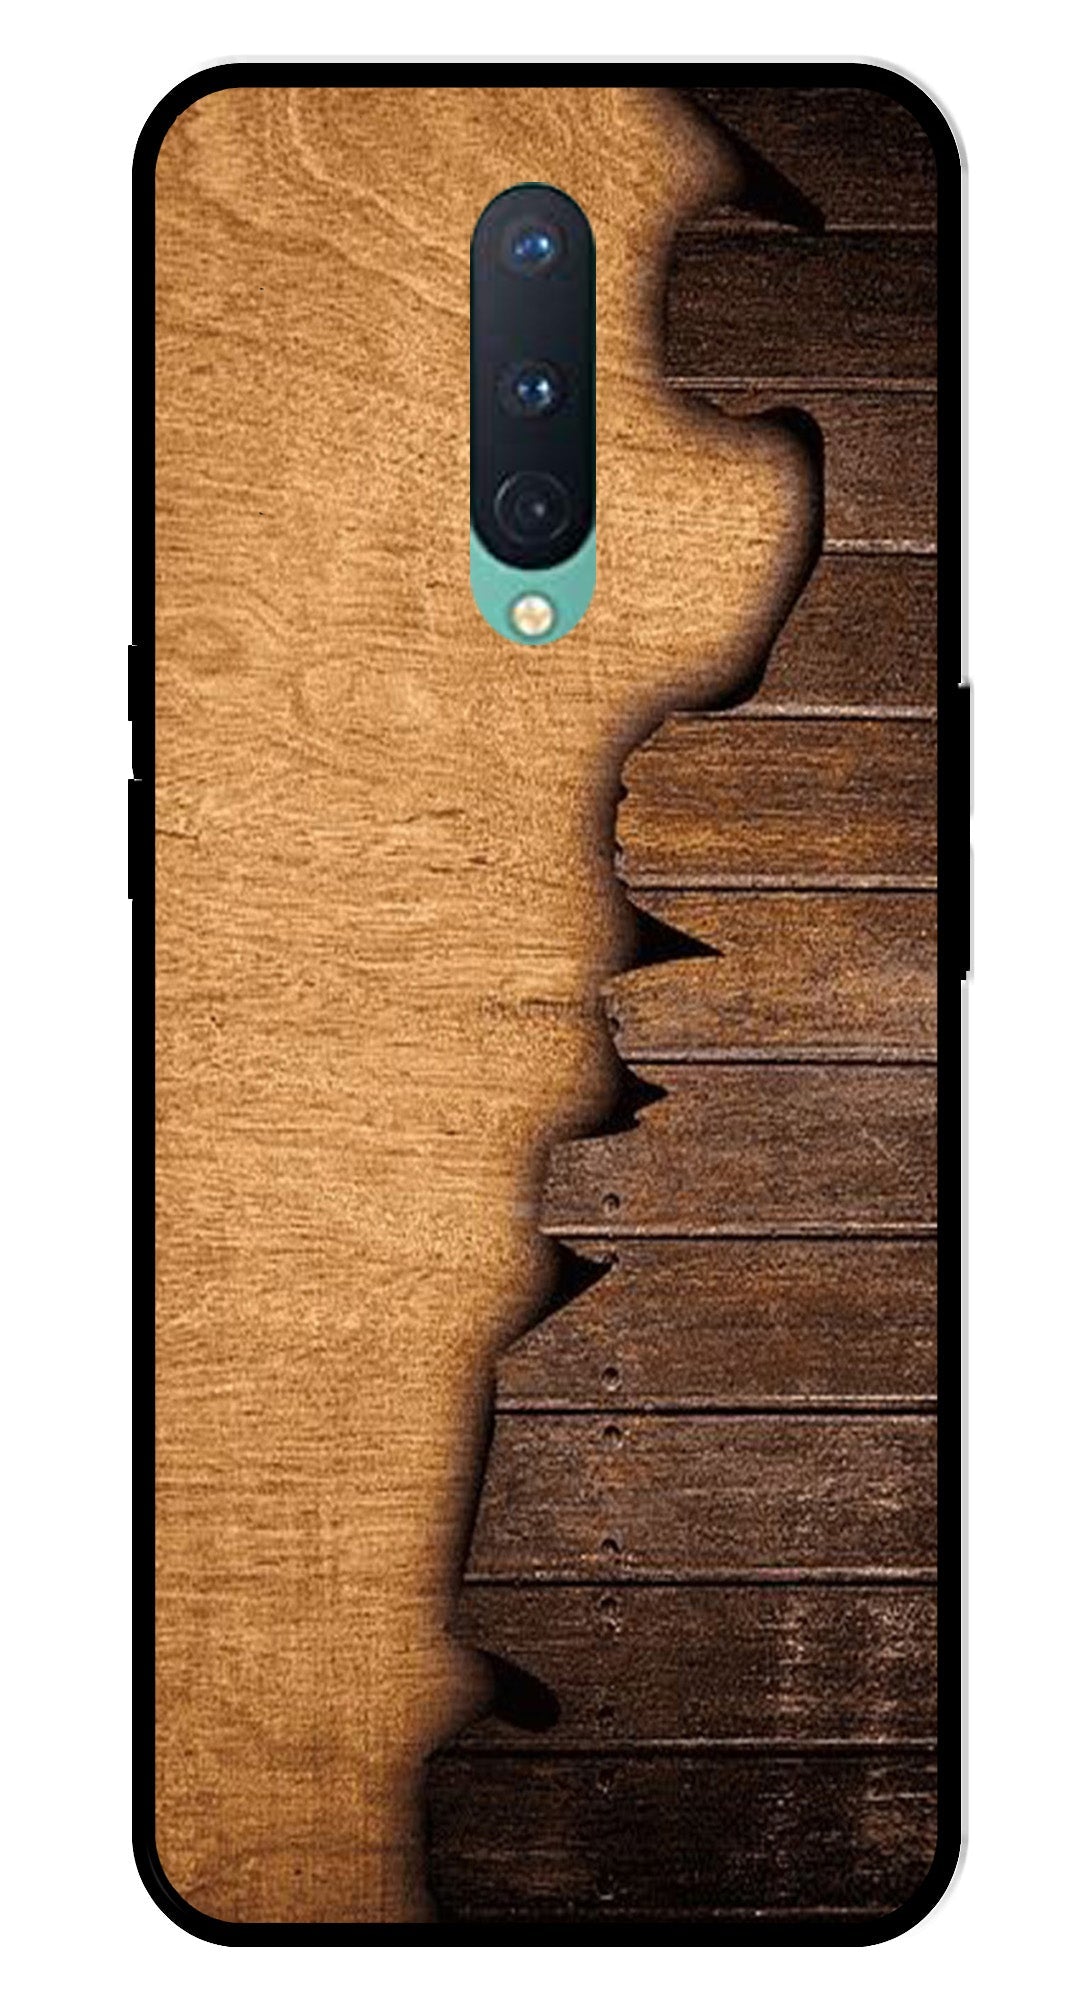 Wooden Design Metal Mobile Case for OnePlus 8